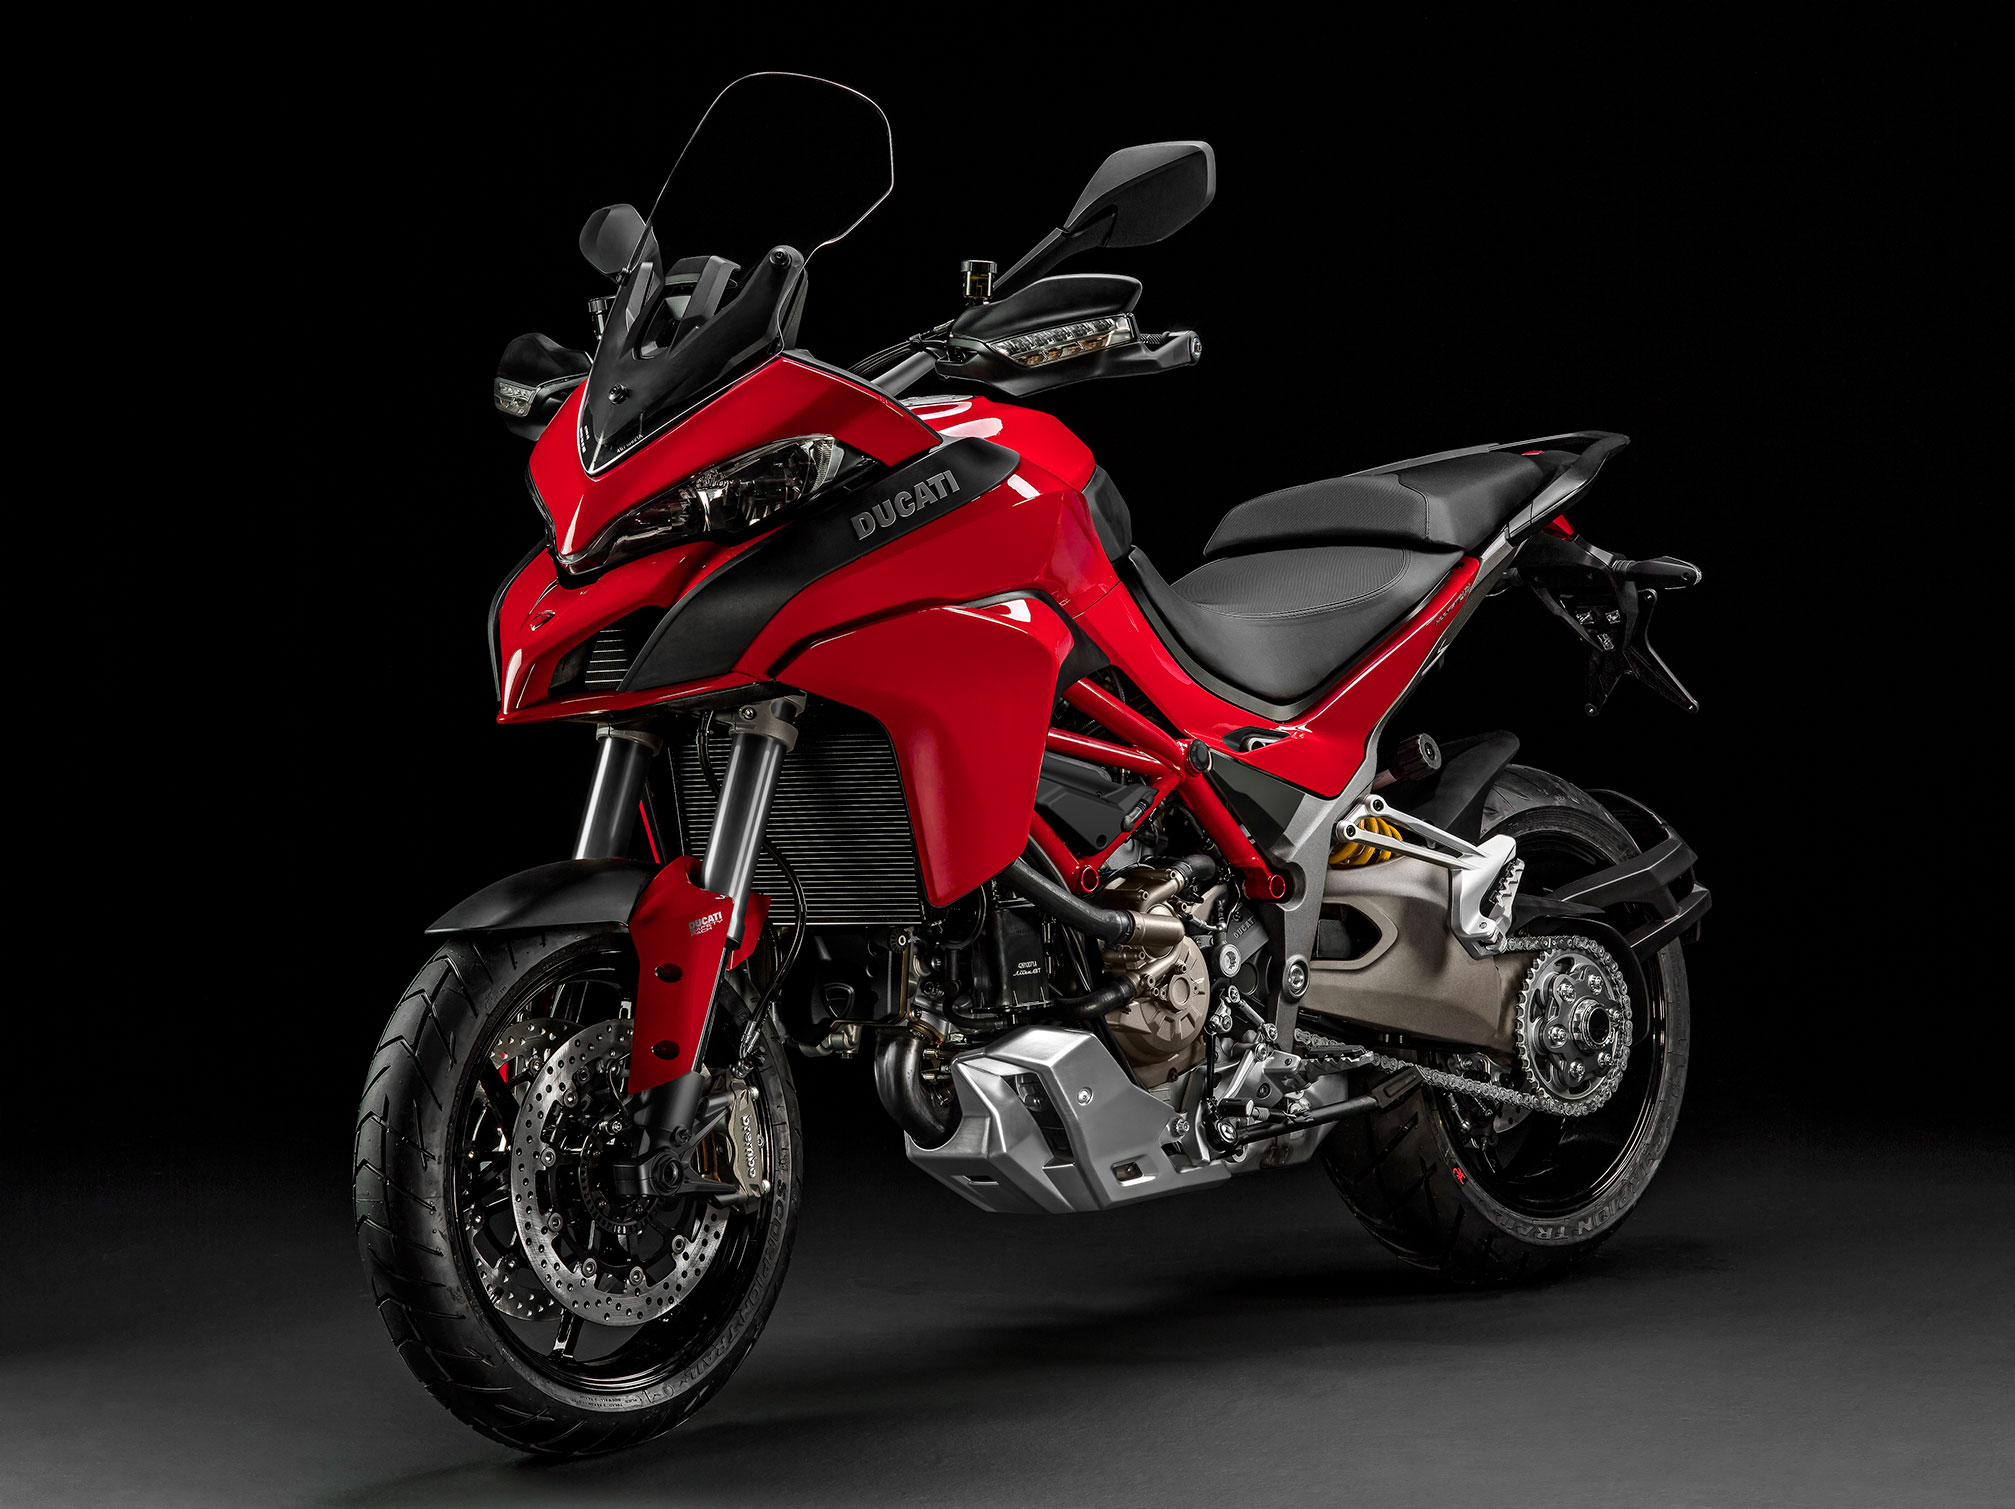 2015-Ducati-Multistrada-1200-DVT3 - Motorcycle news, Motorcycle reviews  from Malaysia, Asia and the world 